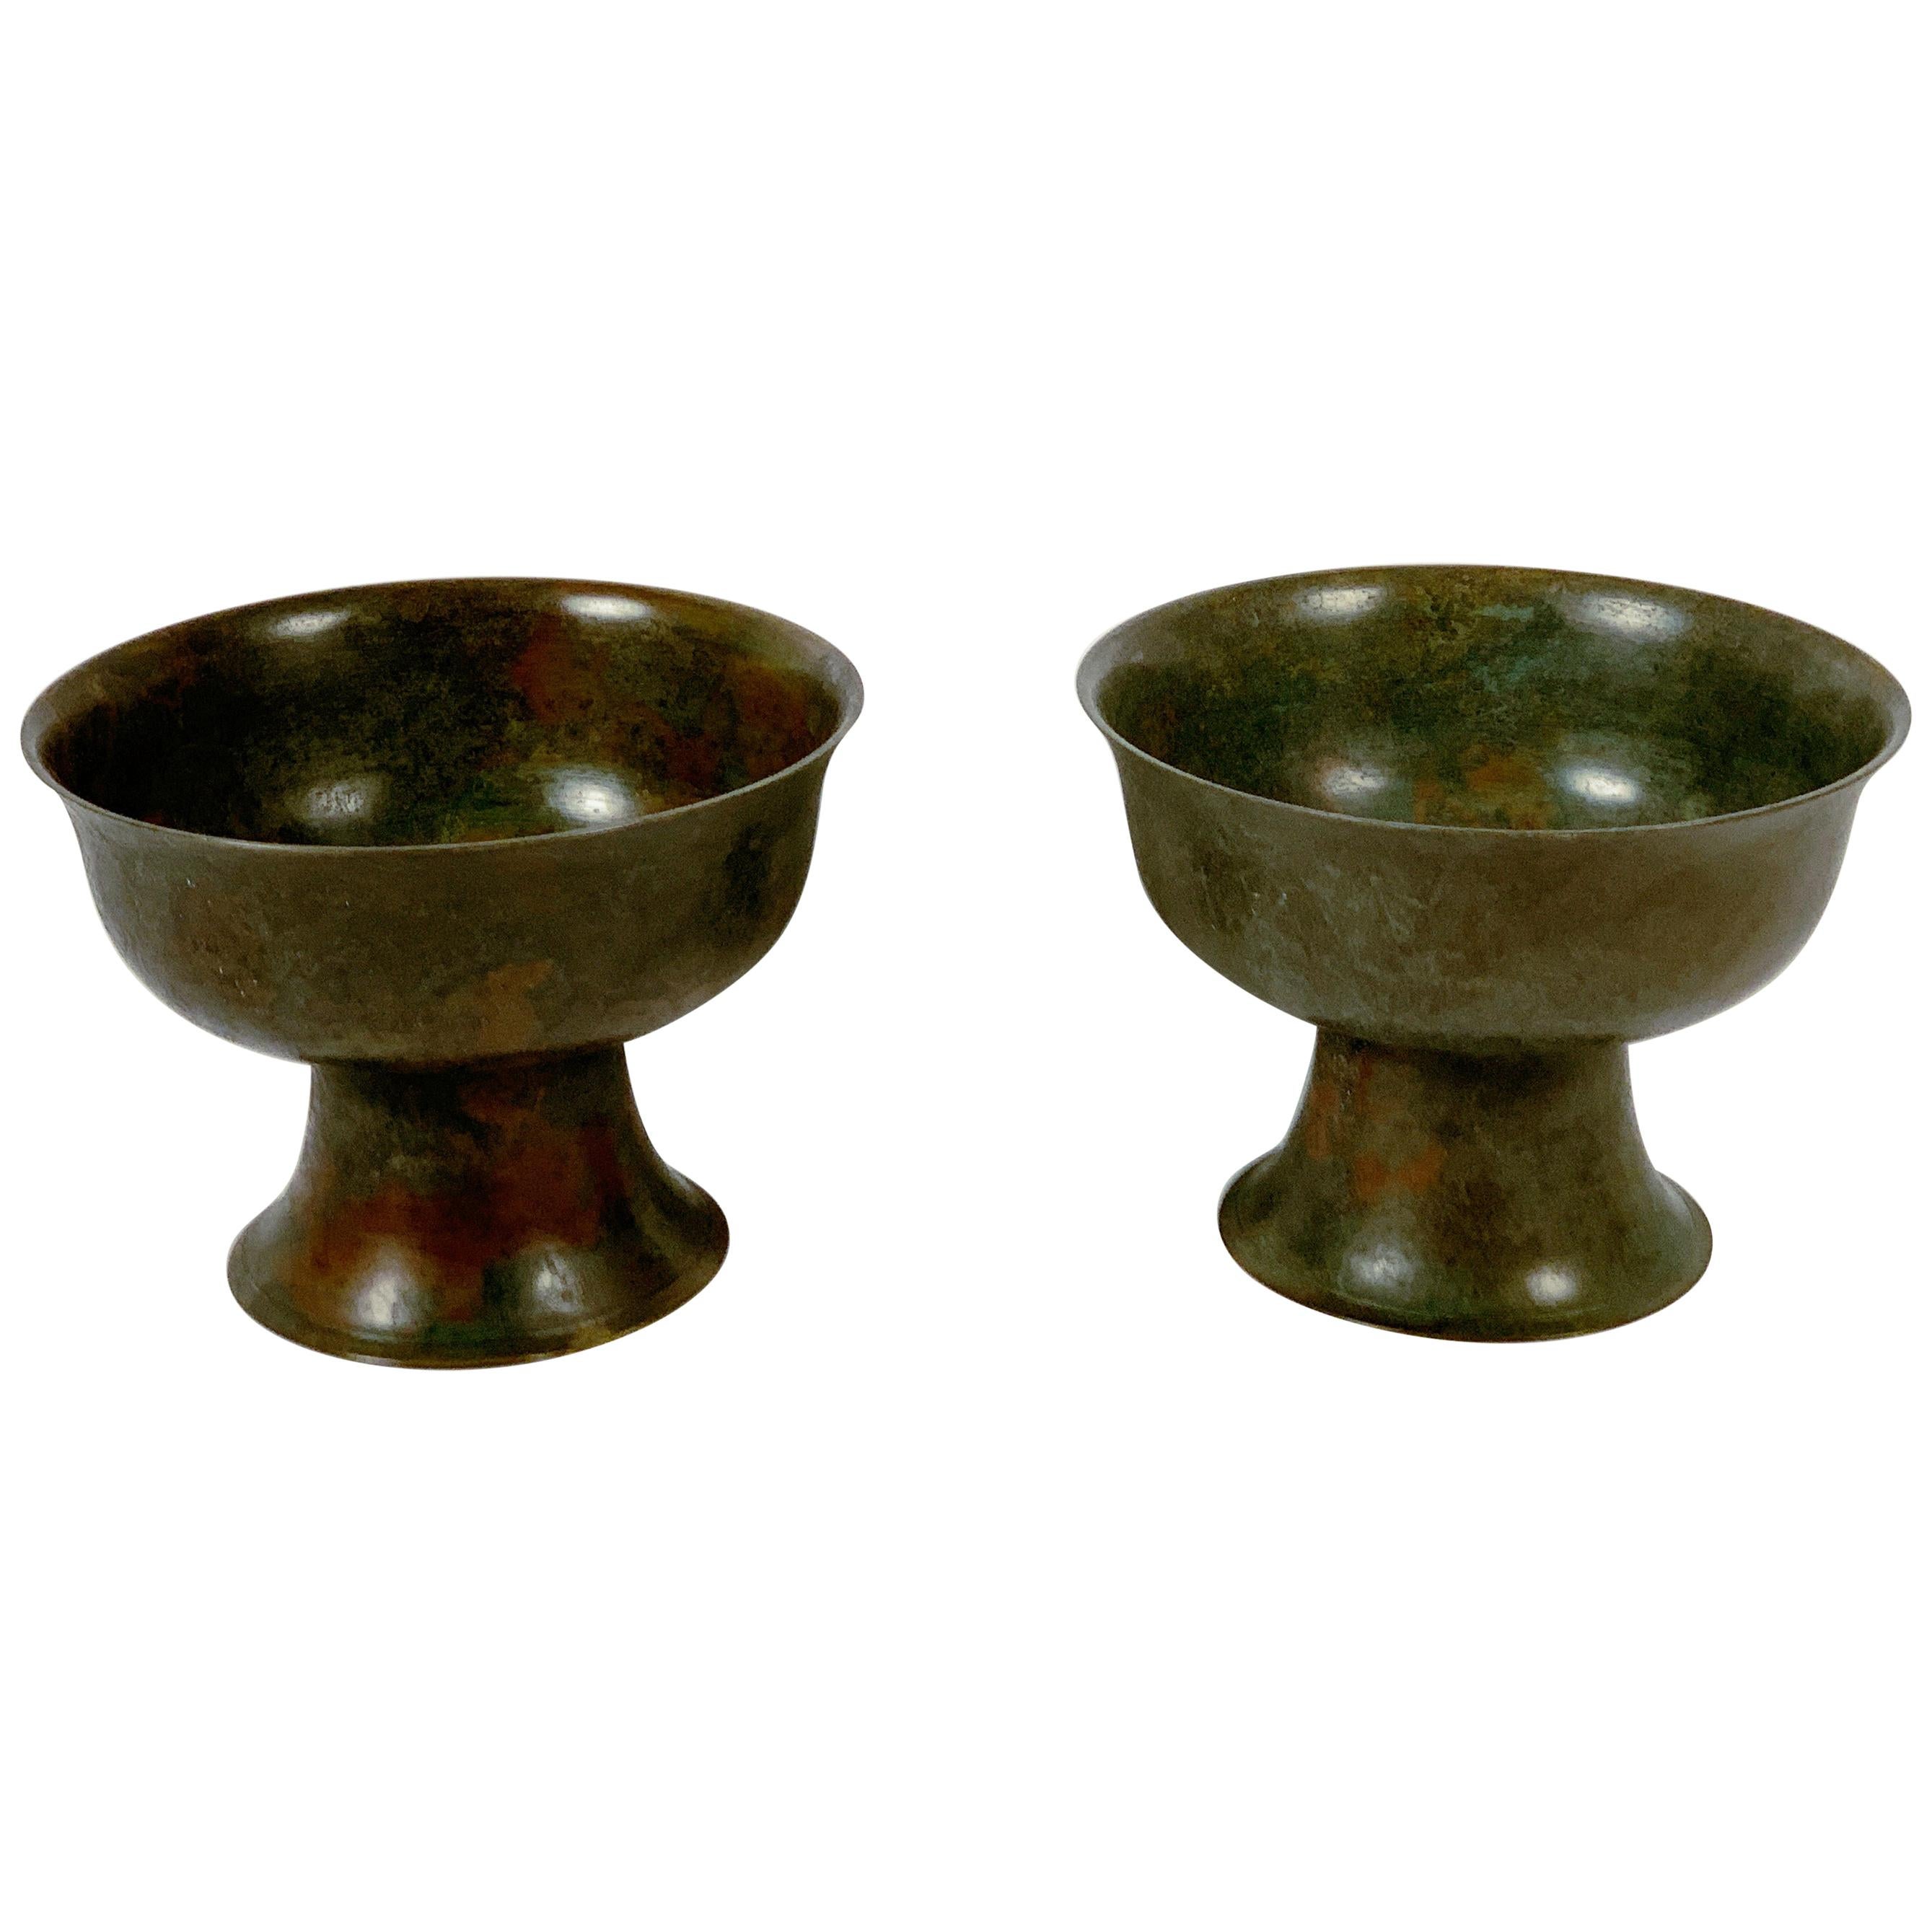 An exquisite pair of Korean bronze pedestal offering bowls, Goryeo Dynasty, 13th-15th century, Korea. 

The Goryeo bronze bowls of generous proportions, with high sides and an ever so slightly everted rim. The bowls are supported on a pedestal